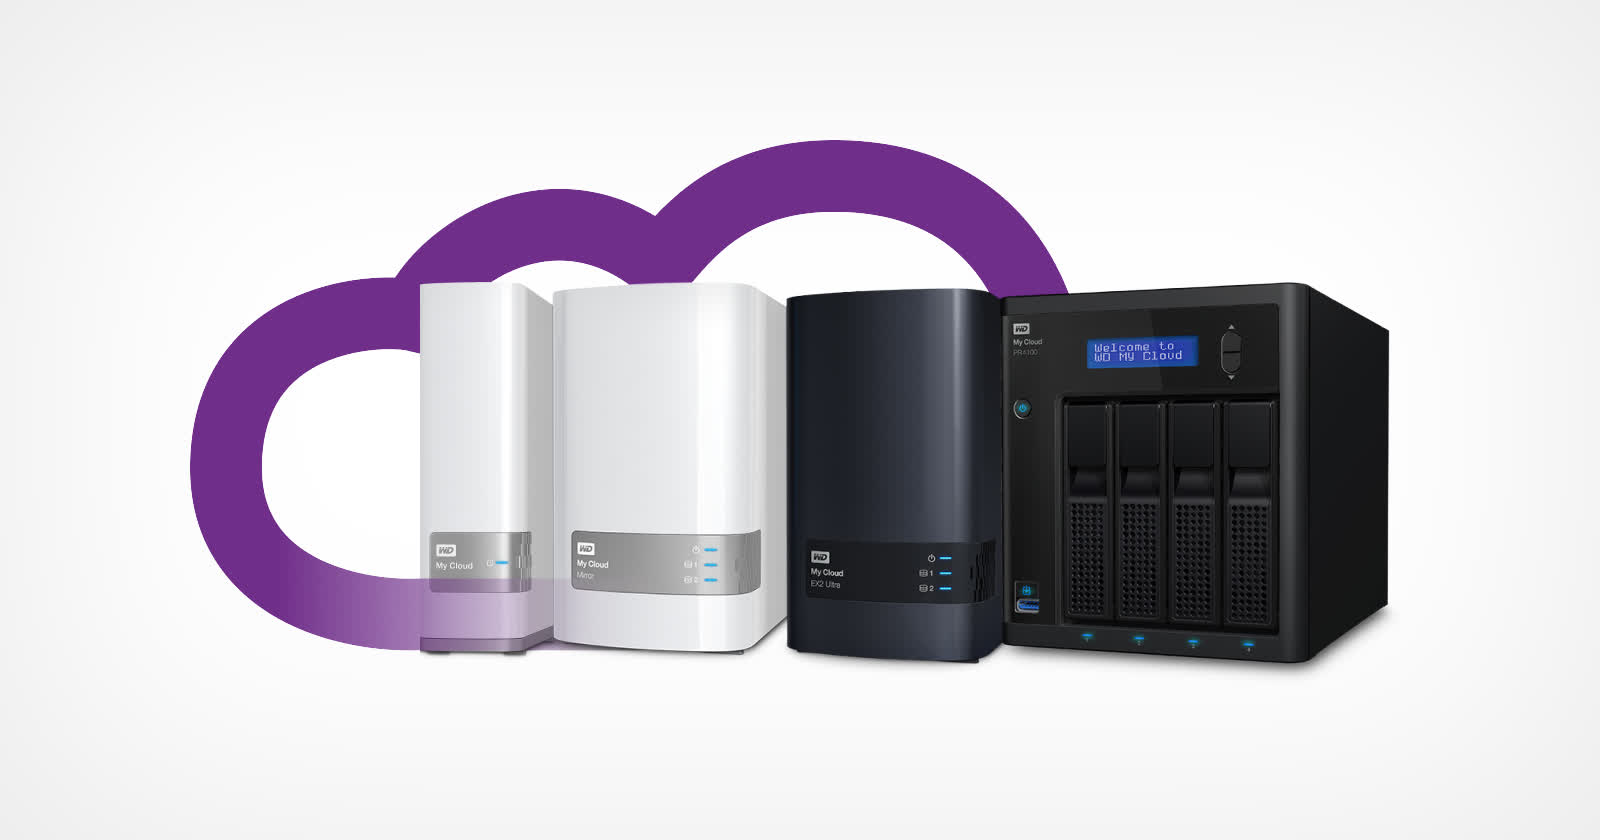 WD My Cloud drive owners 'strongly' advised to upgrade to the company's latest firmware